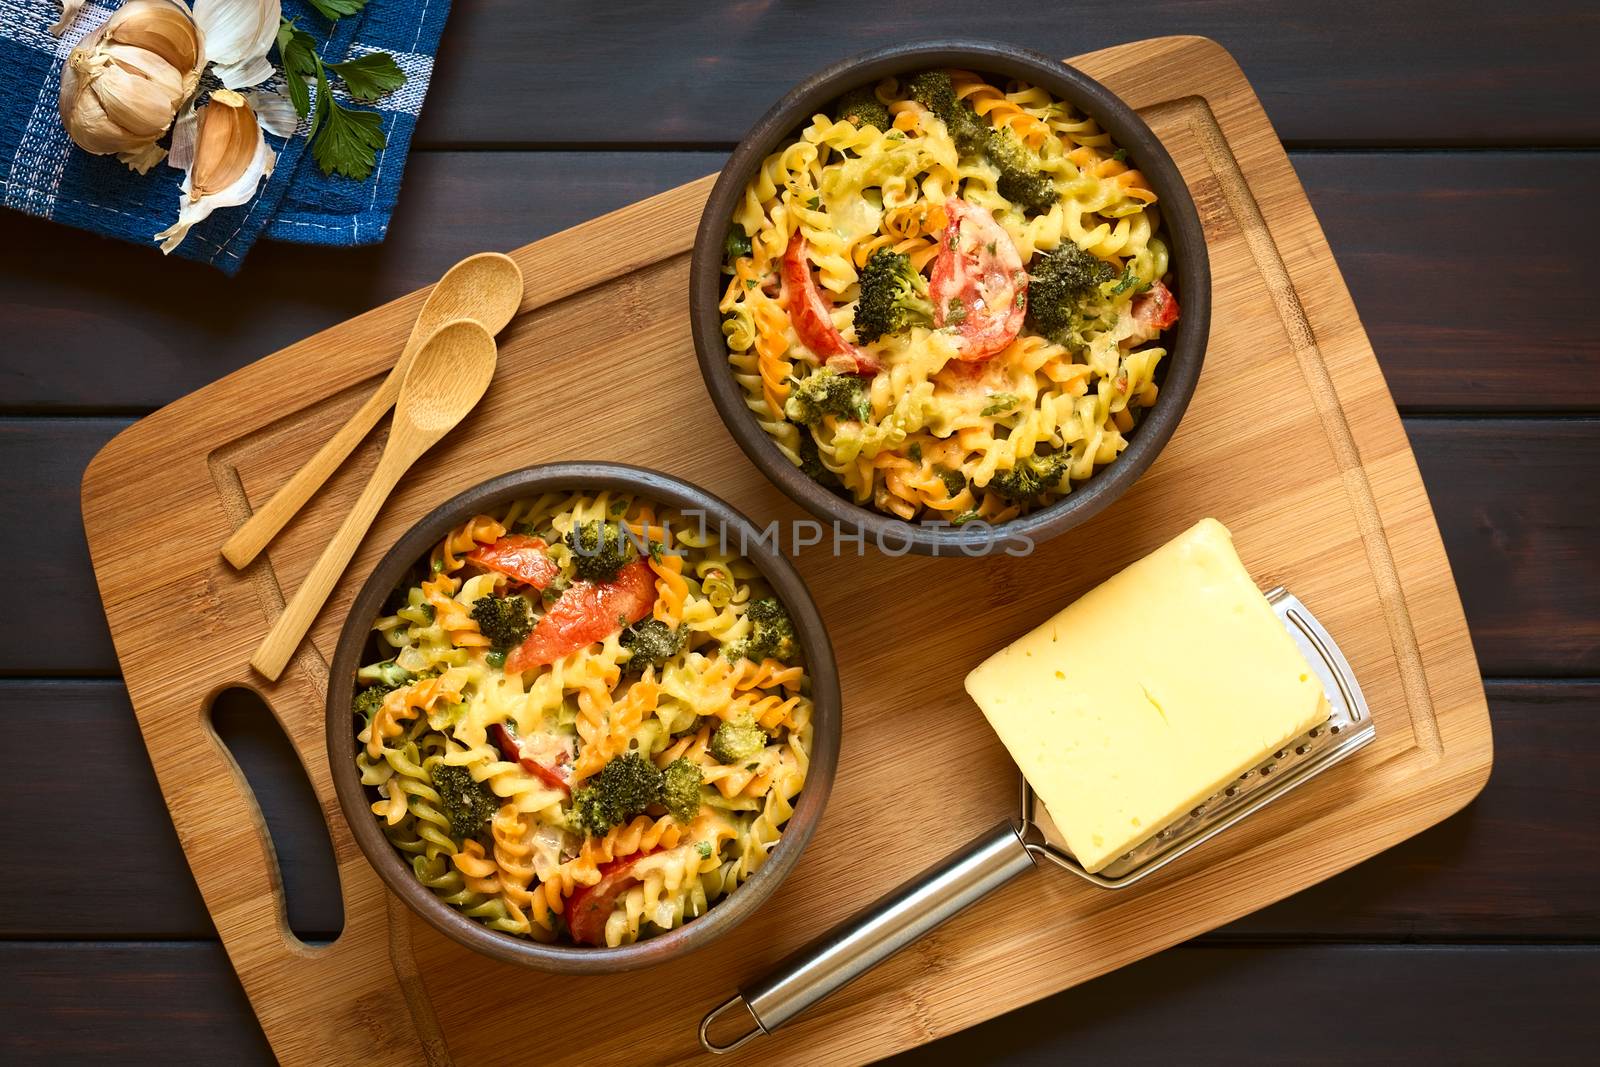 Baked tricolor fusilli pasta and vegetable (broccoli, tomato) casserole in rustic bowls, with grater, cheese and spoons on wooden board, photographed overhead on dark wood with natural light